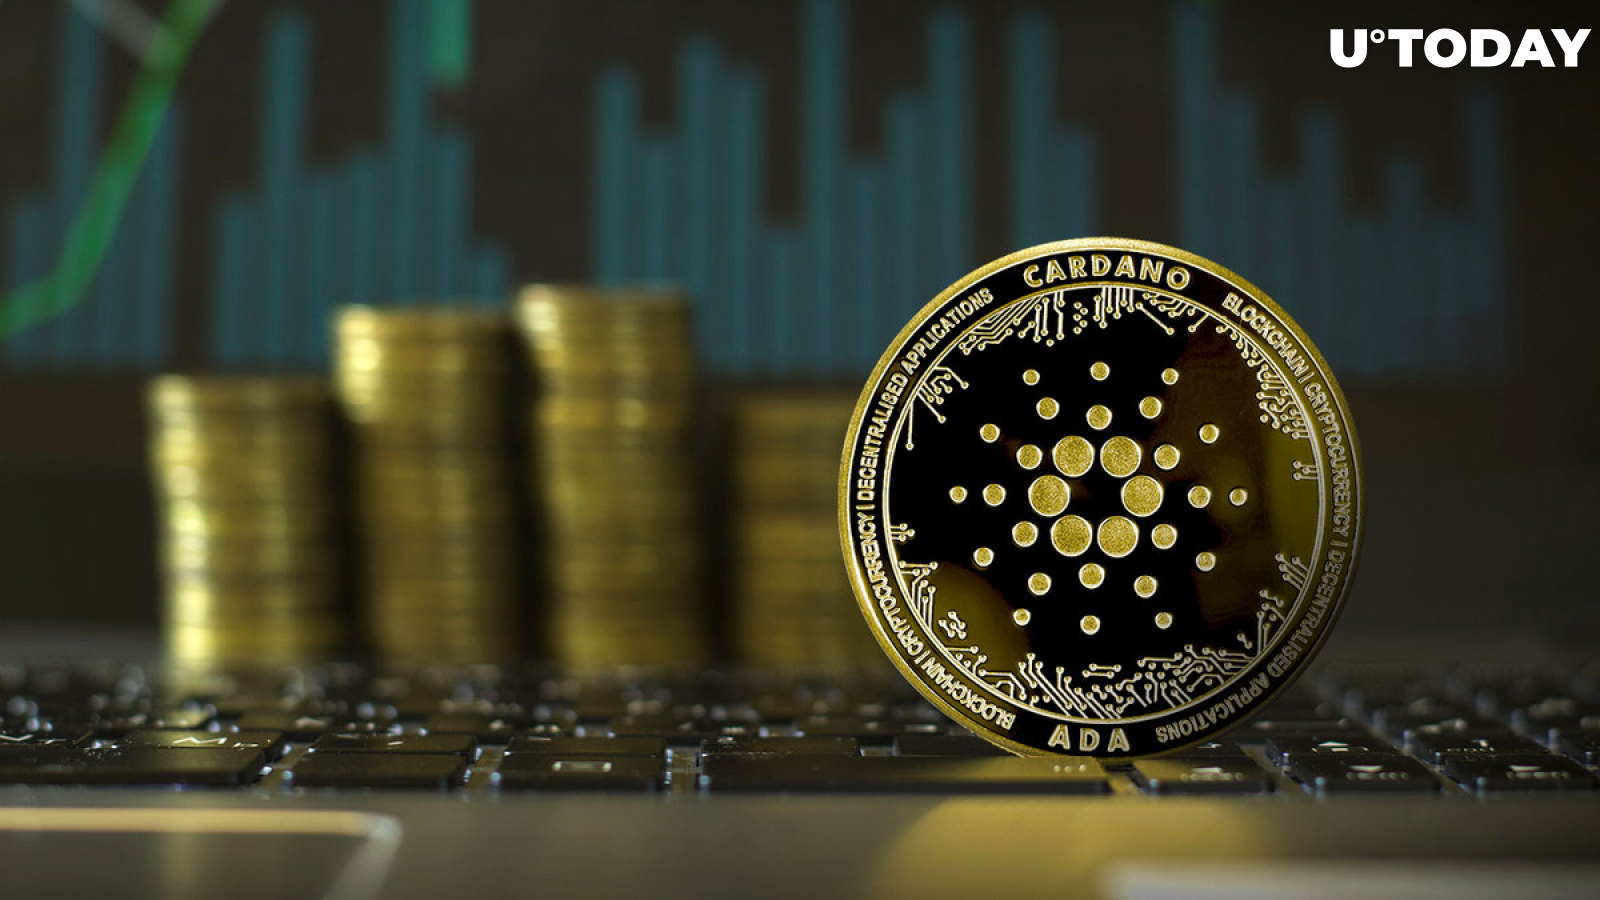 Cardano (ADA) Price Soars to Key Major Level at 50 Cents: What's Next?